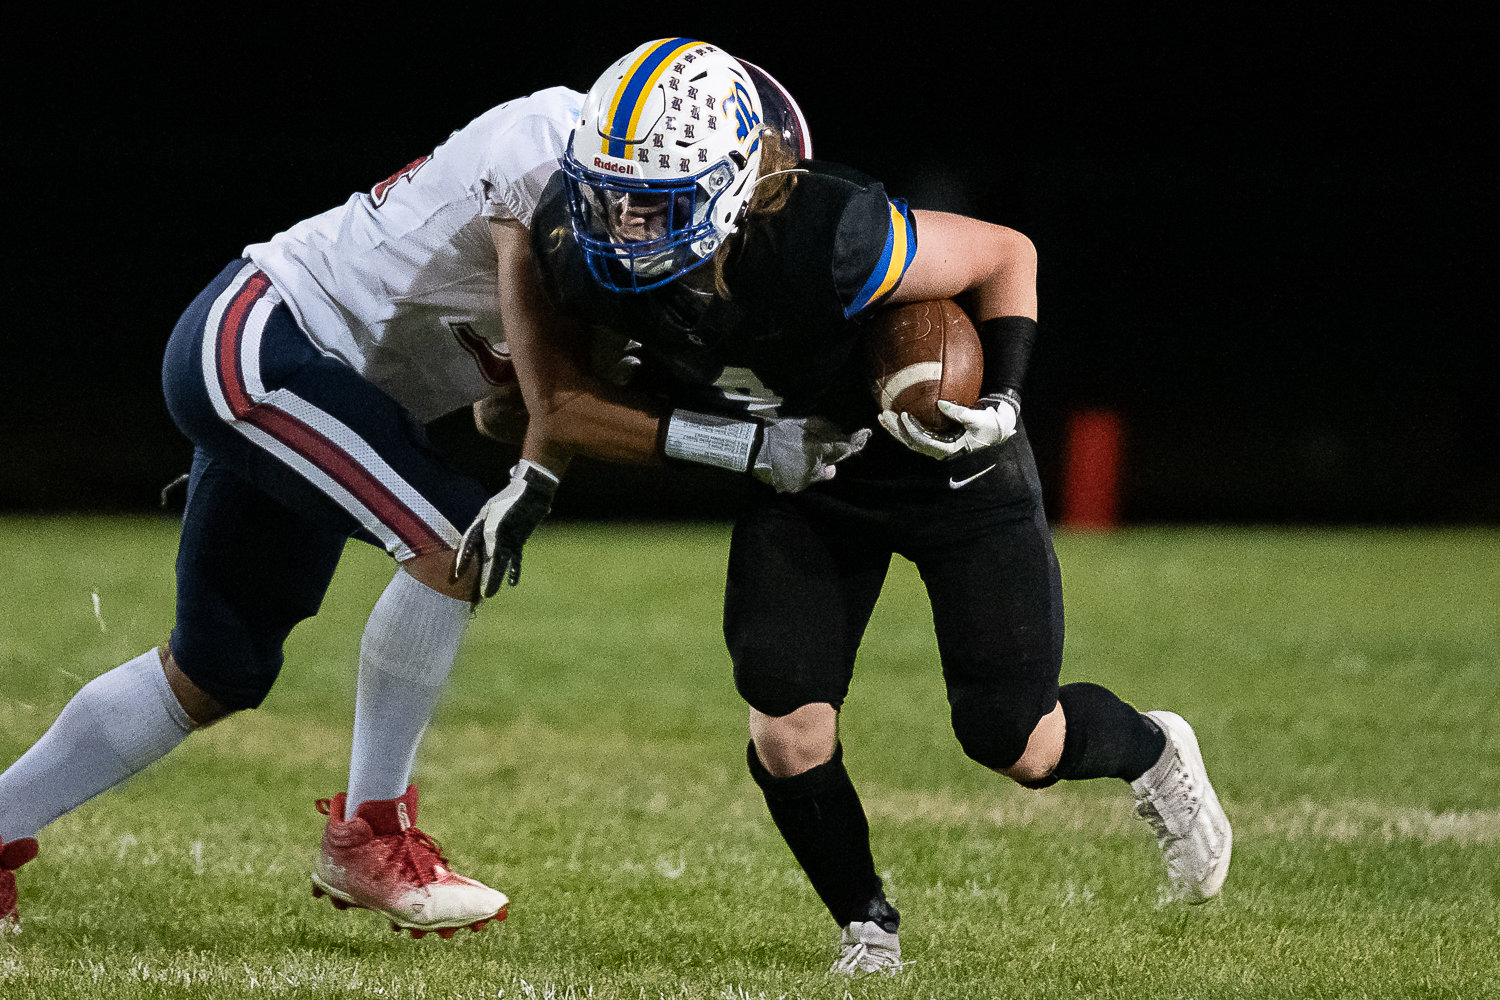 Rochester's Braden Hartley looks to break a tackle in a 34-14 loss to Black Hills Sept. 16.